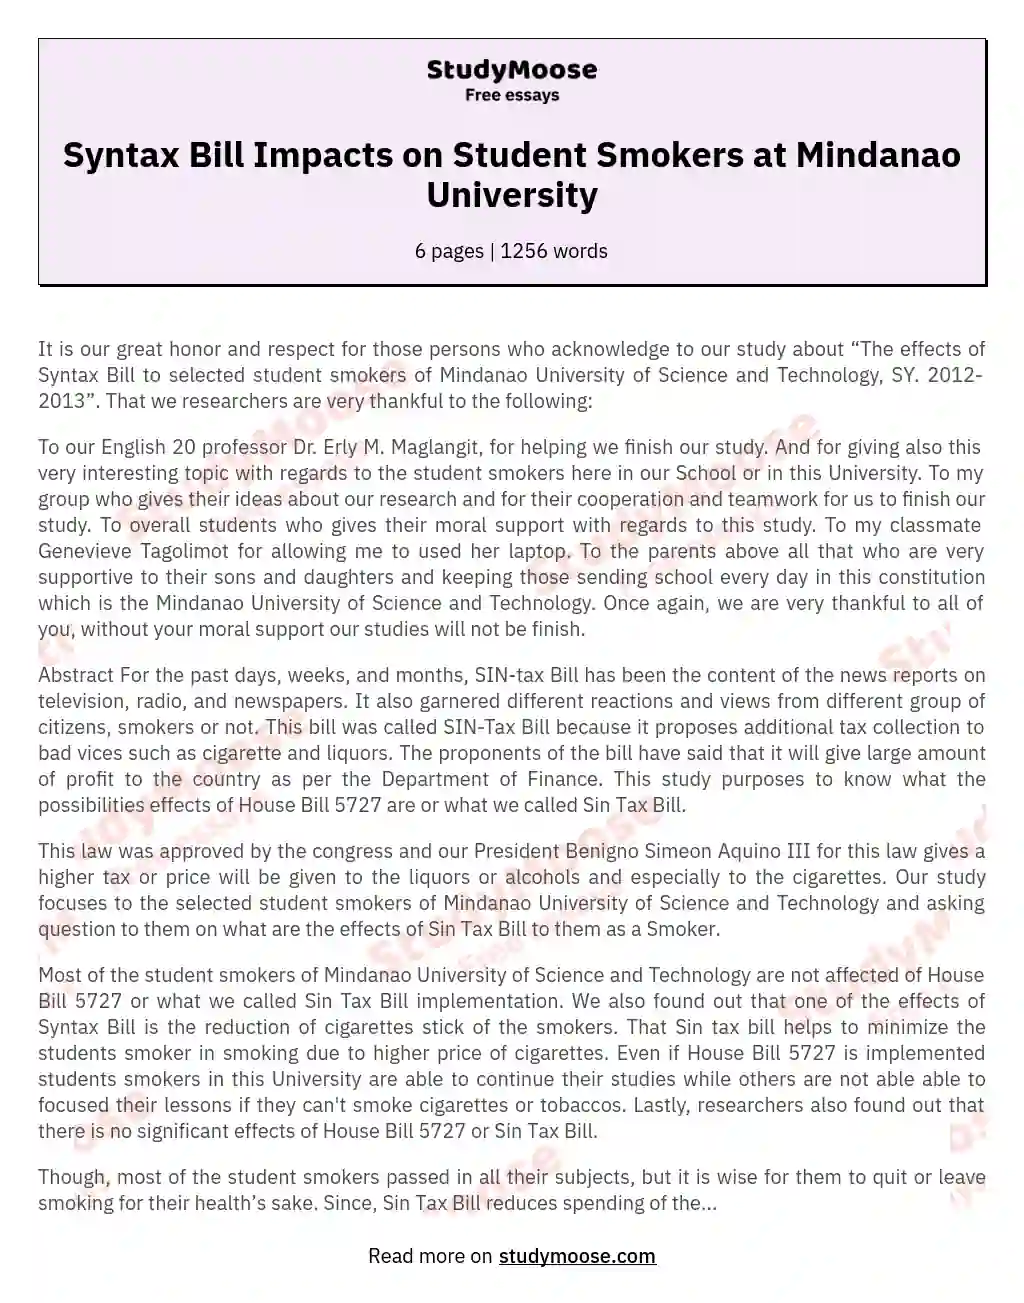 Effects of syntax bill to student smokers of Mindanao University of Science and Technology